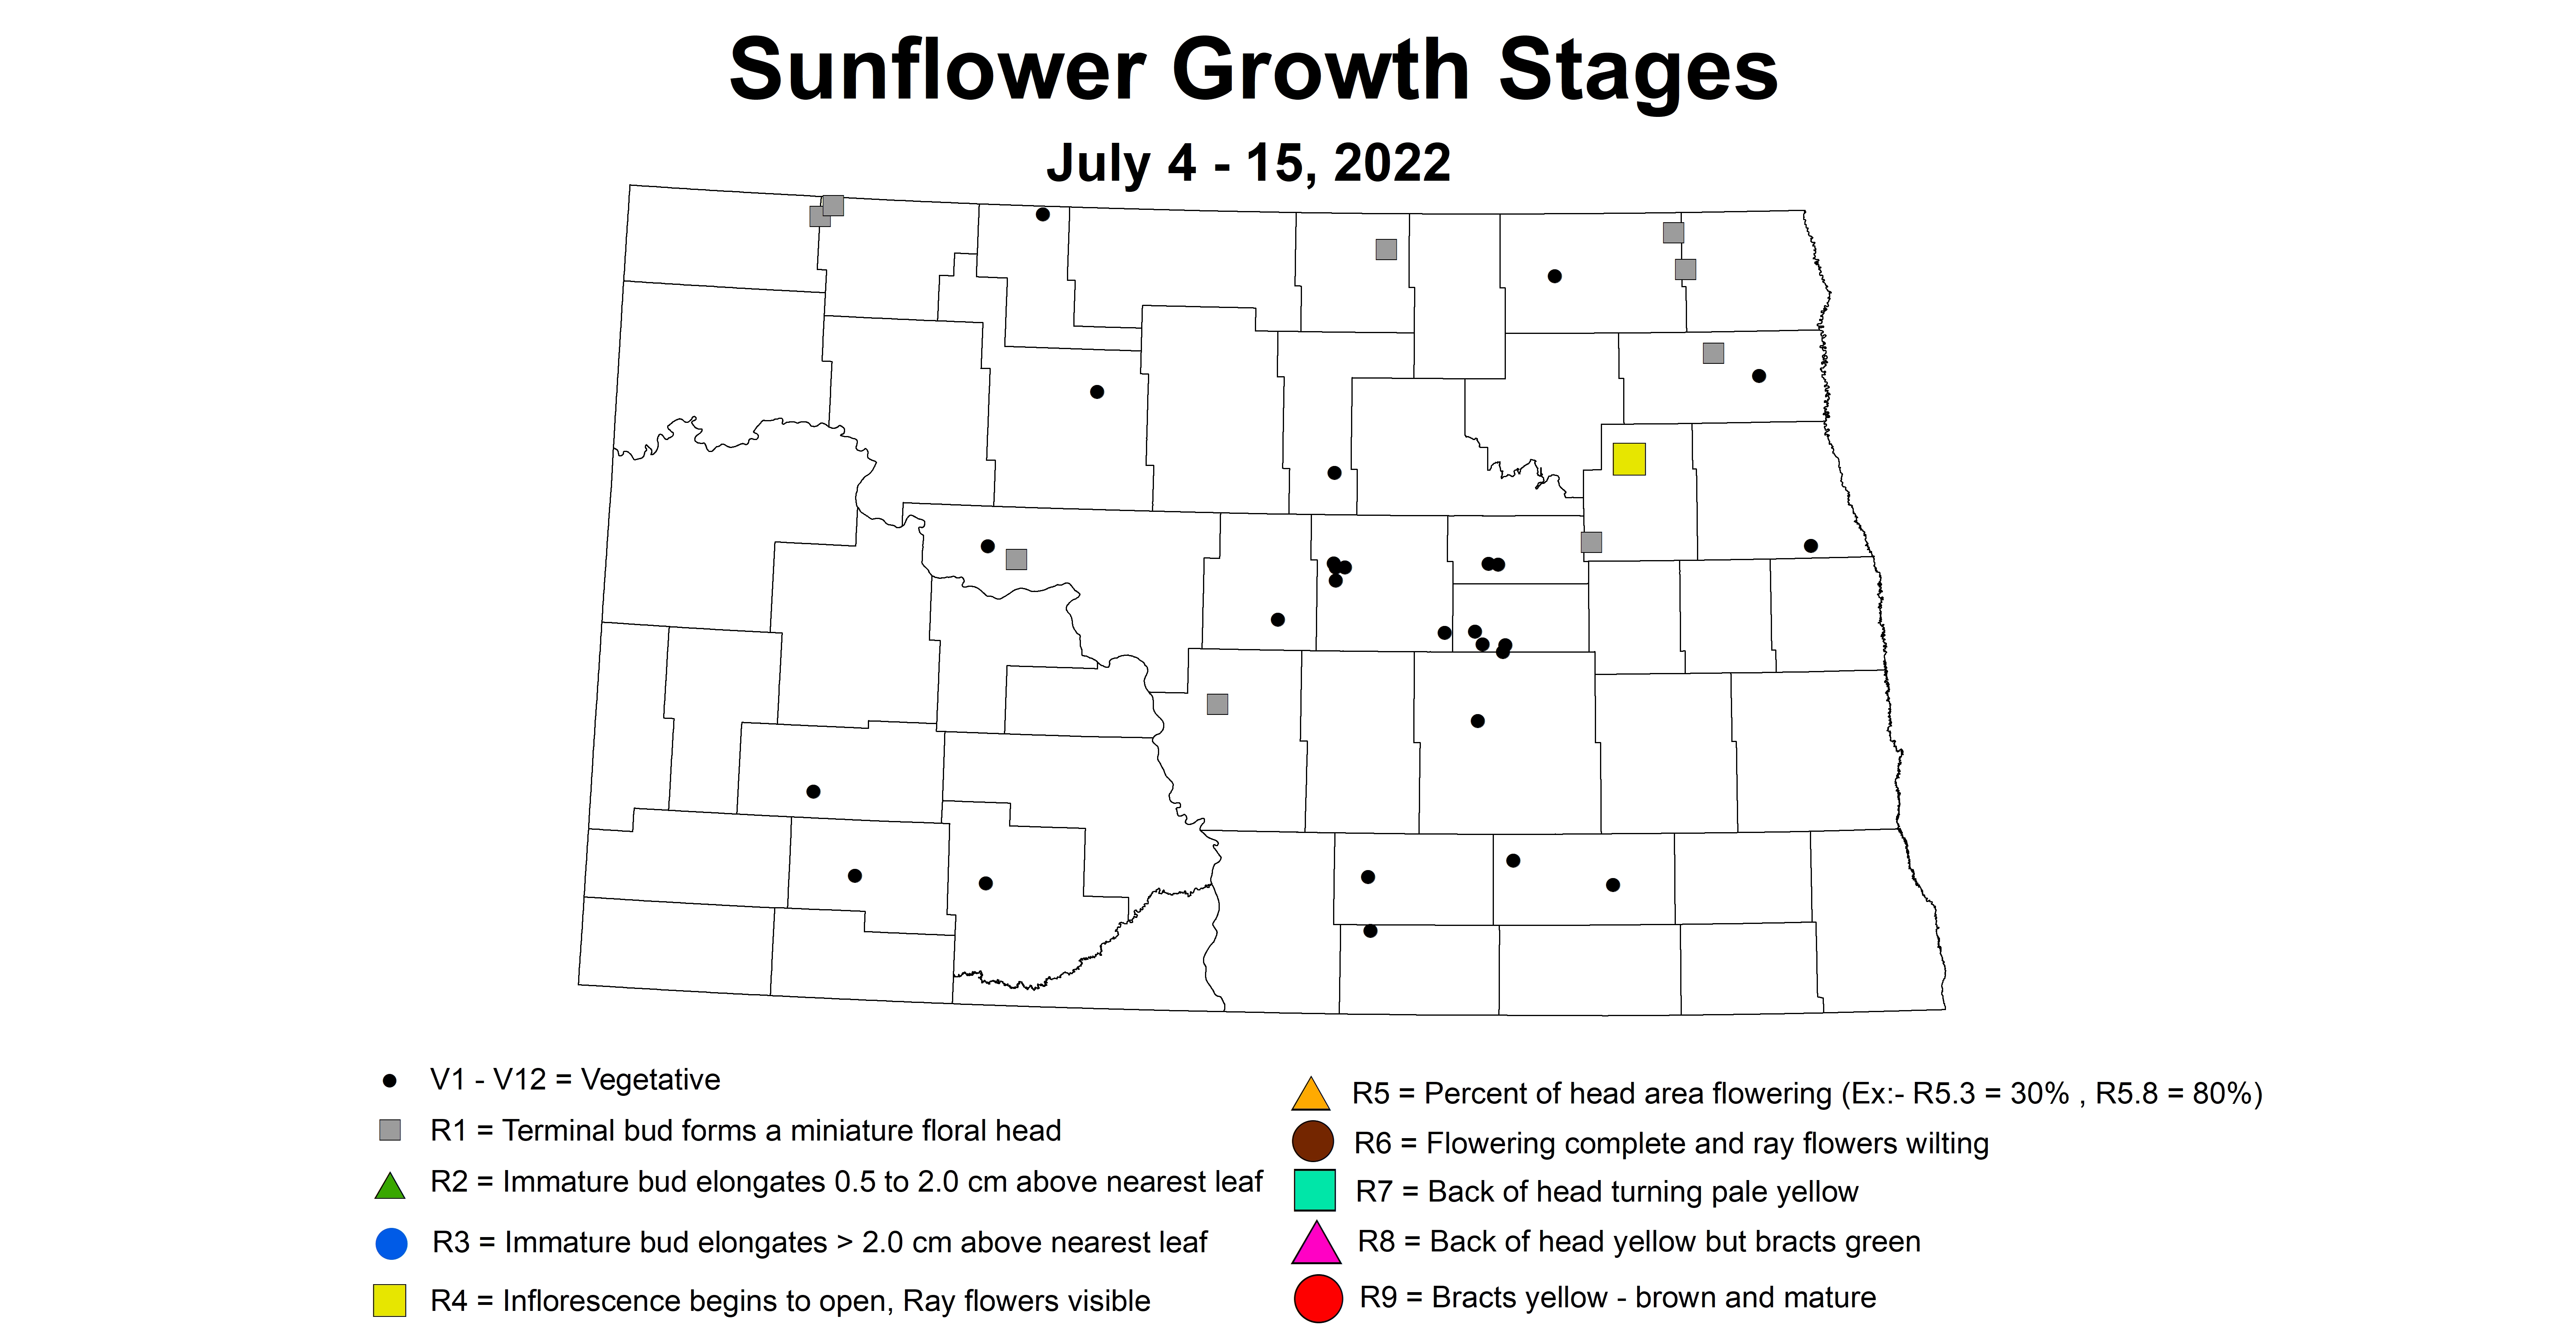 sunflower growth stages 2022 7.4-7.15